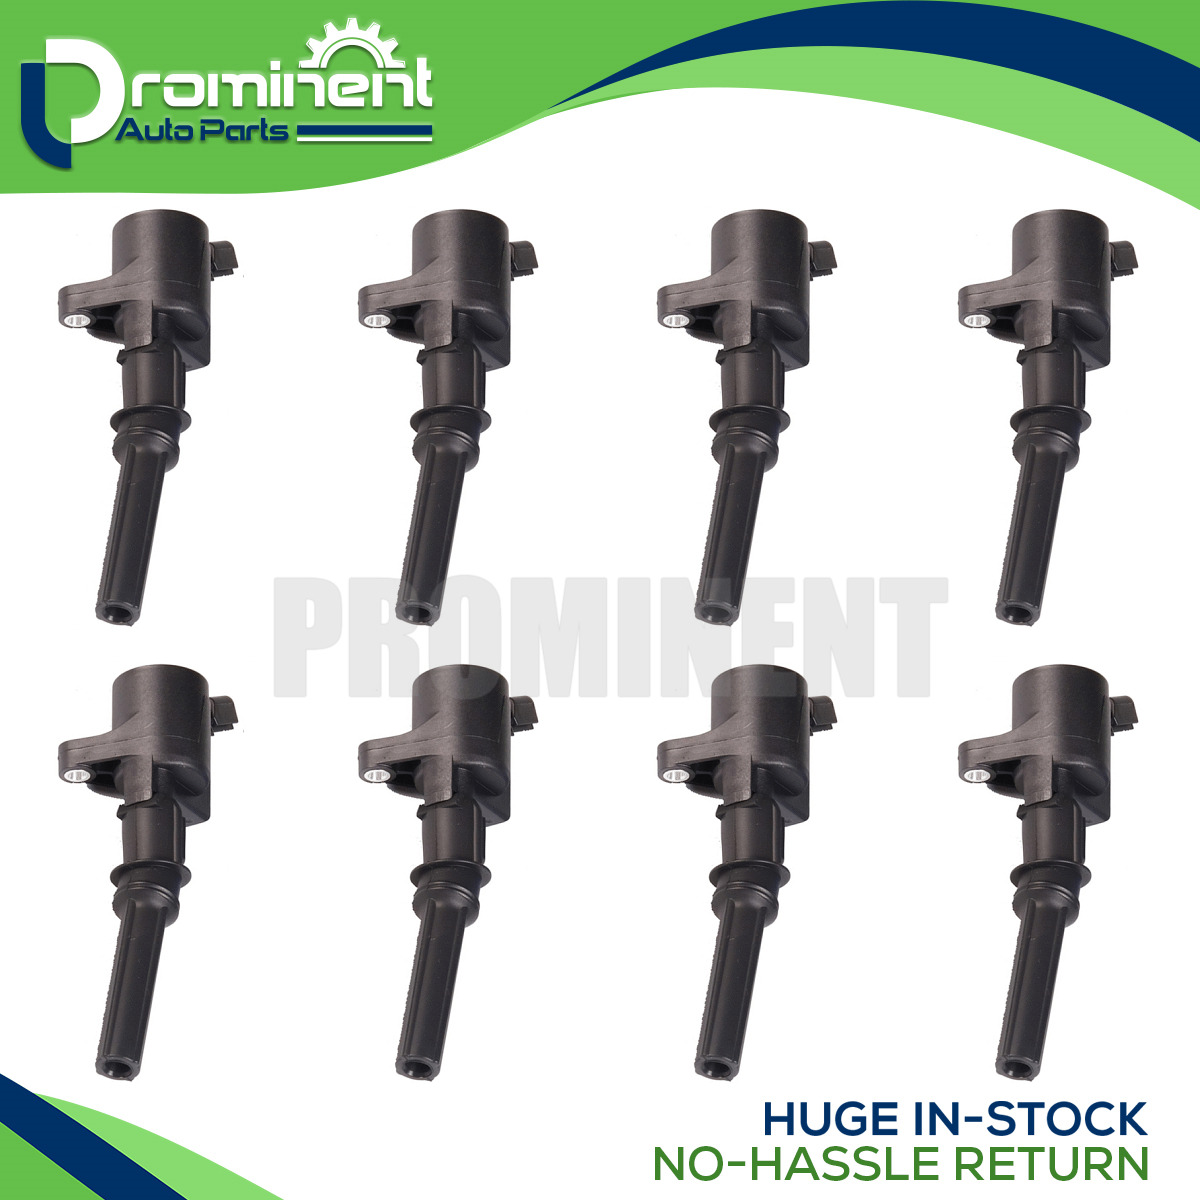 8 Ignition Coils For Ford F150 F250 F350 F550 4.6L 5.4L V8 FD503